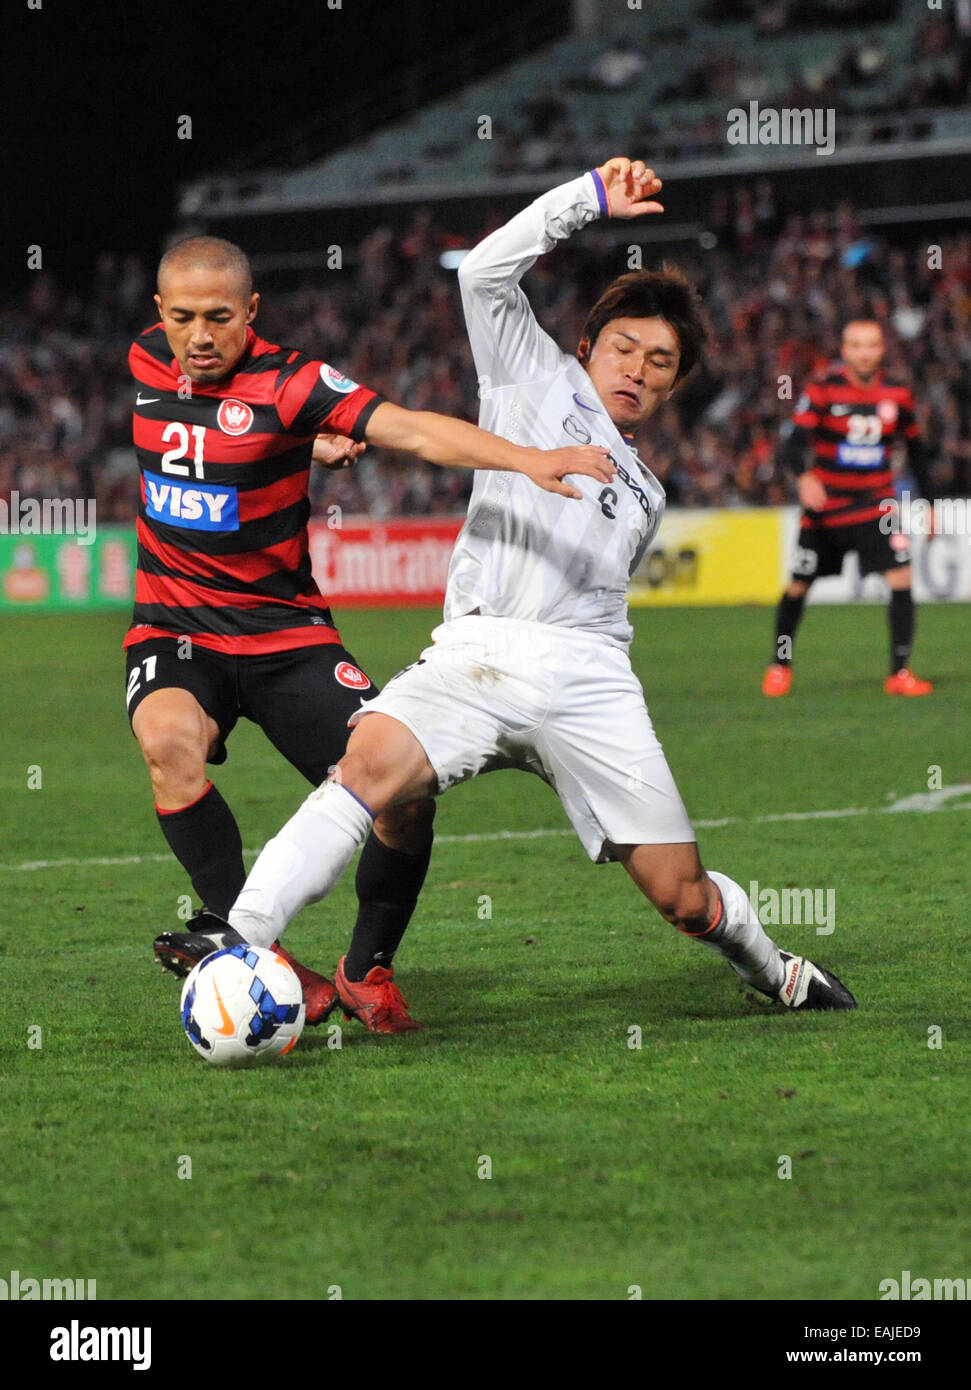 The Western Sydney Wanderers beat Sanfrecce Hiroshima 2-0 to overcome a 1-3 deficit after the first leg of the elimination round.  Featuring: Shinji Ono,Aoyama Toshihiro Where: Sydney, Australia When: 14 May 2014 Stock Photo